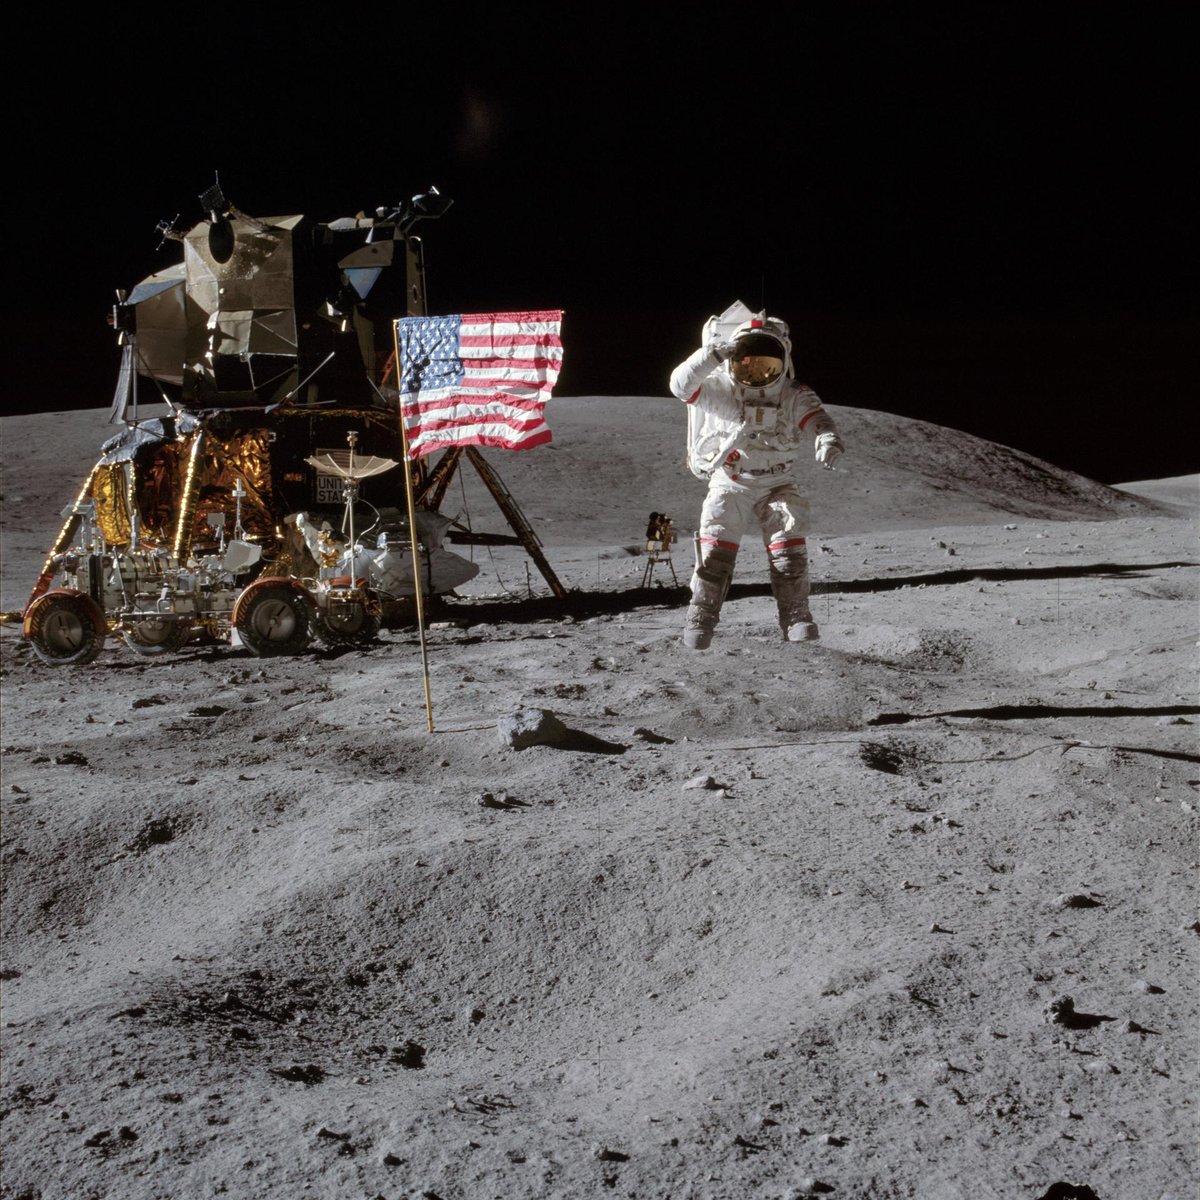 Apollo 16 astronauts John Young and Charlie Duke became the 9th and 10th men to walk on the Moon #OTD in 1972, roaming the Descartes highlands as their crewmate Ken Mattingly orbited above. Watch the classic documentary on NASA+: go.nasa.gov/3w11Olp